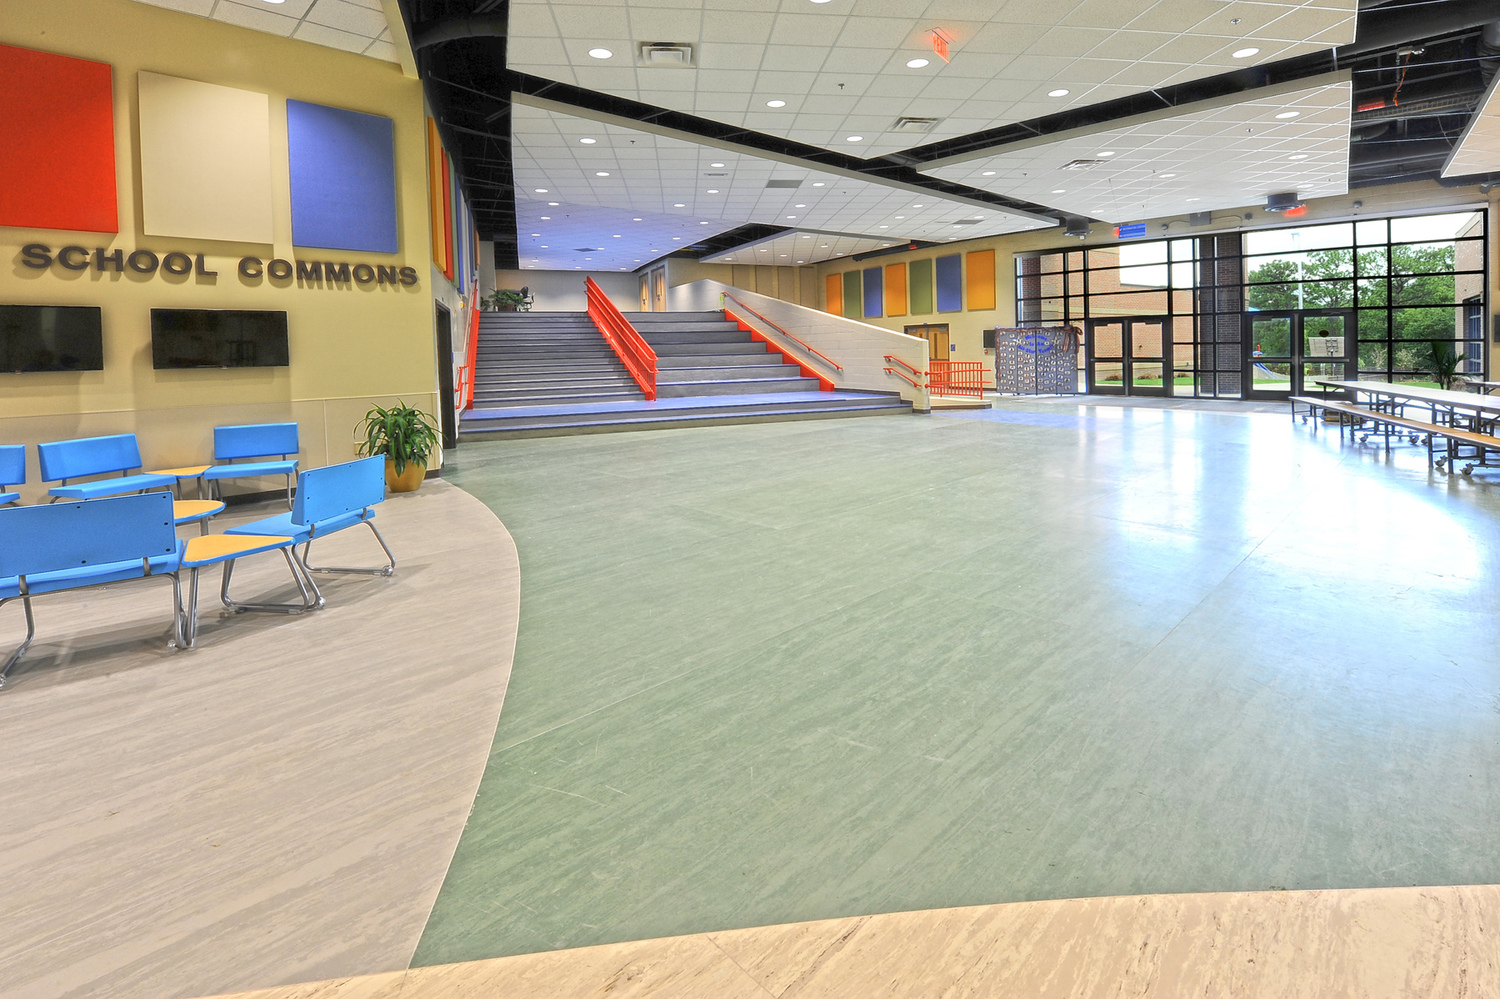 school commons area with acoustical panels on ceiling and large open span area